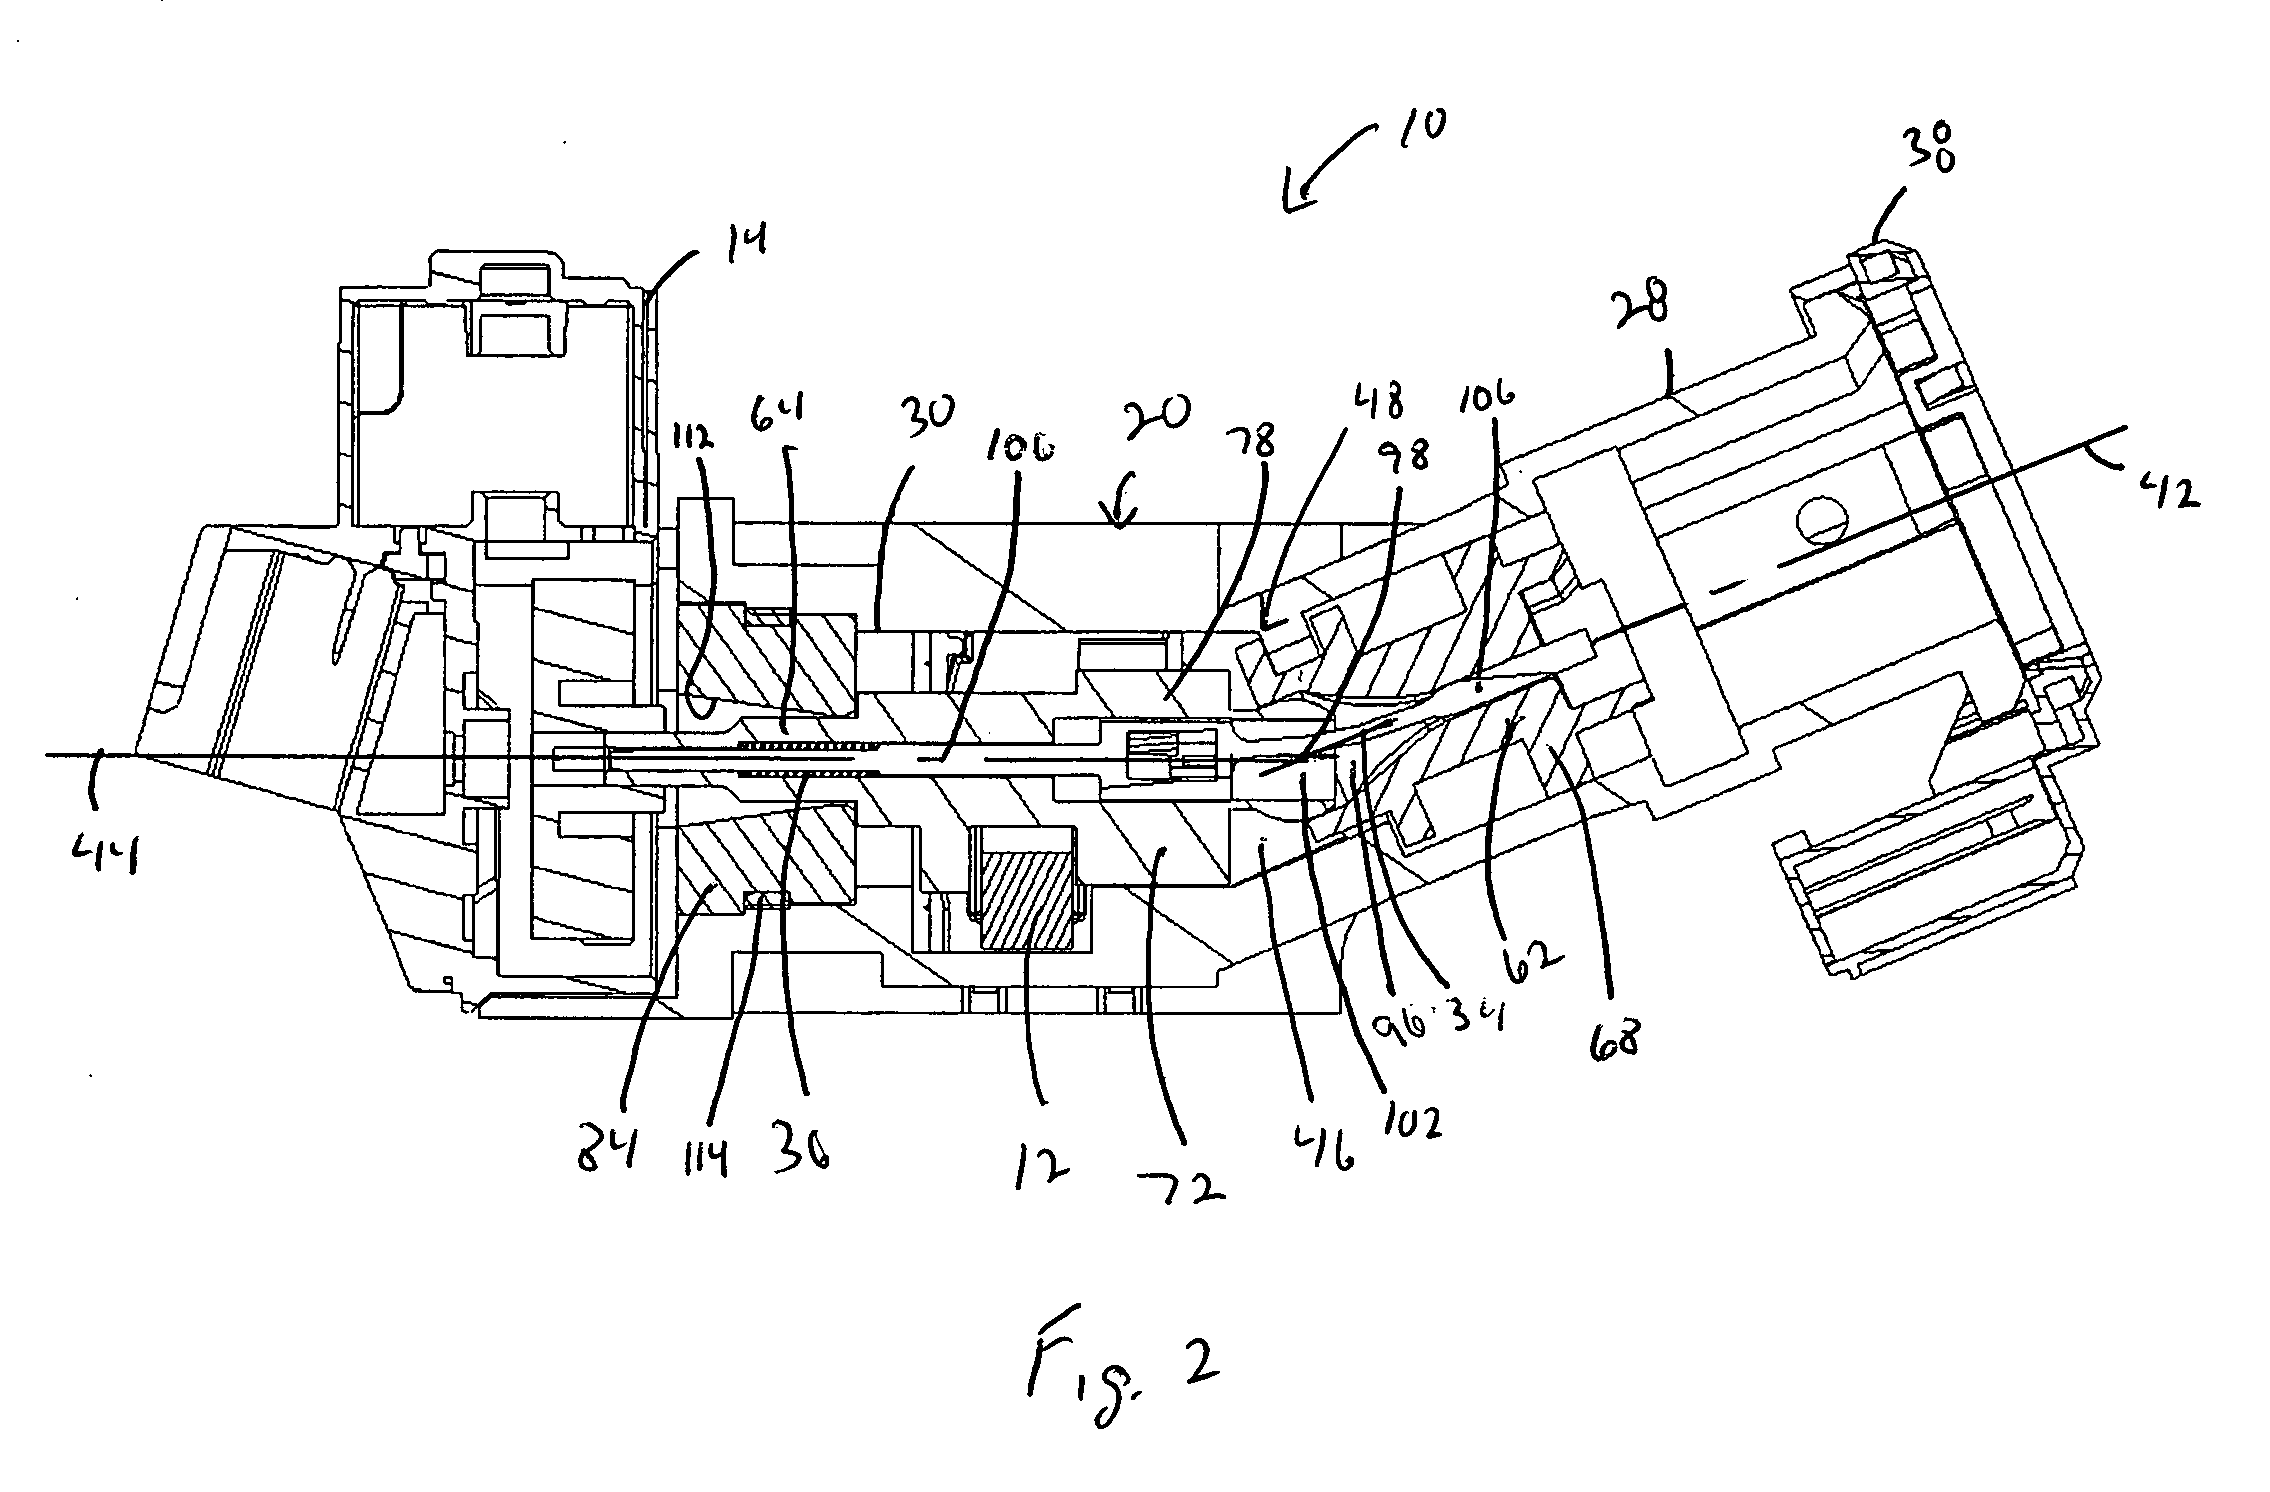 Non-linear steering lock assembly